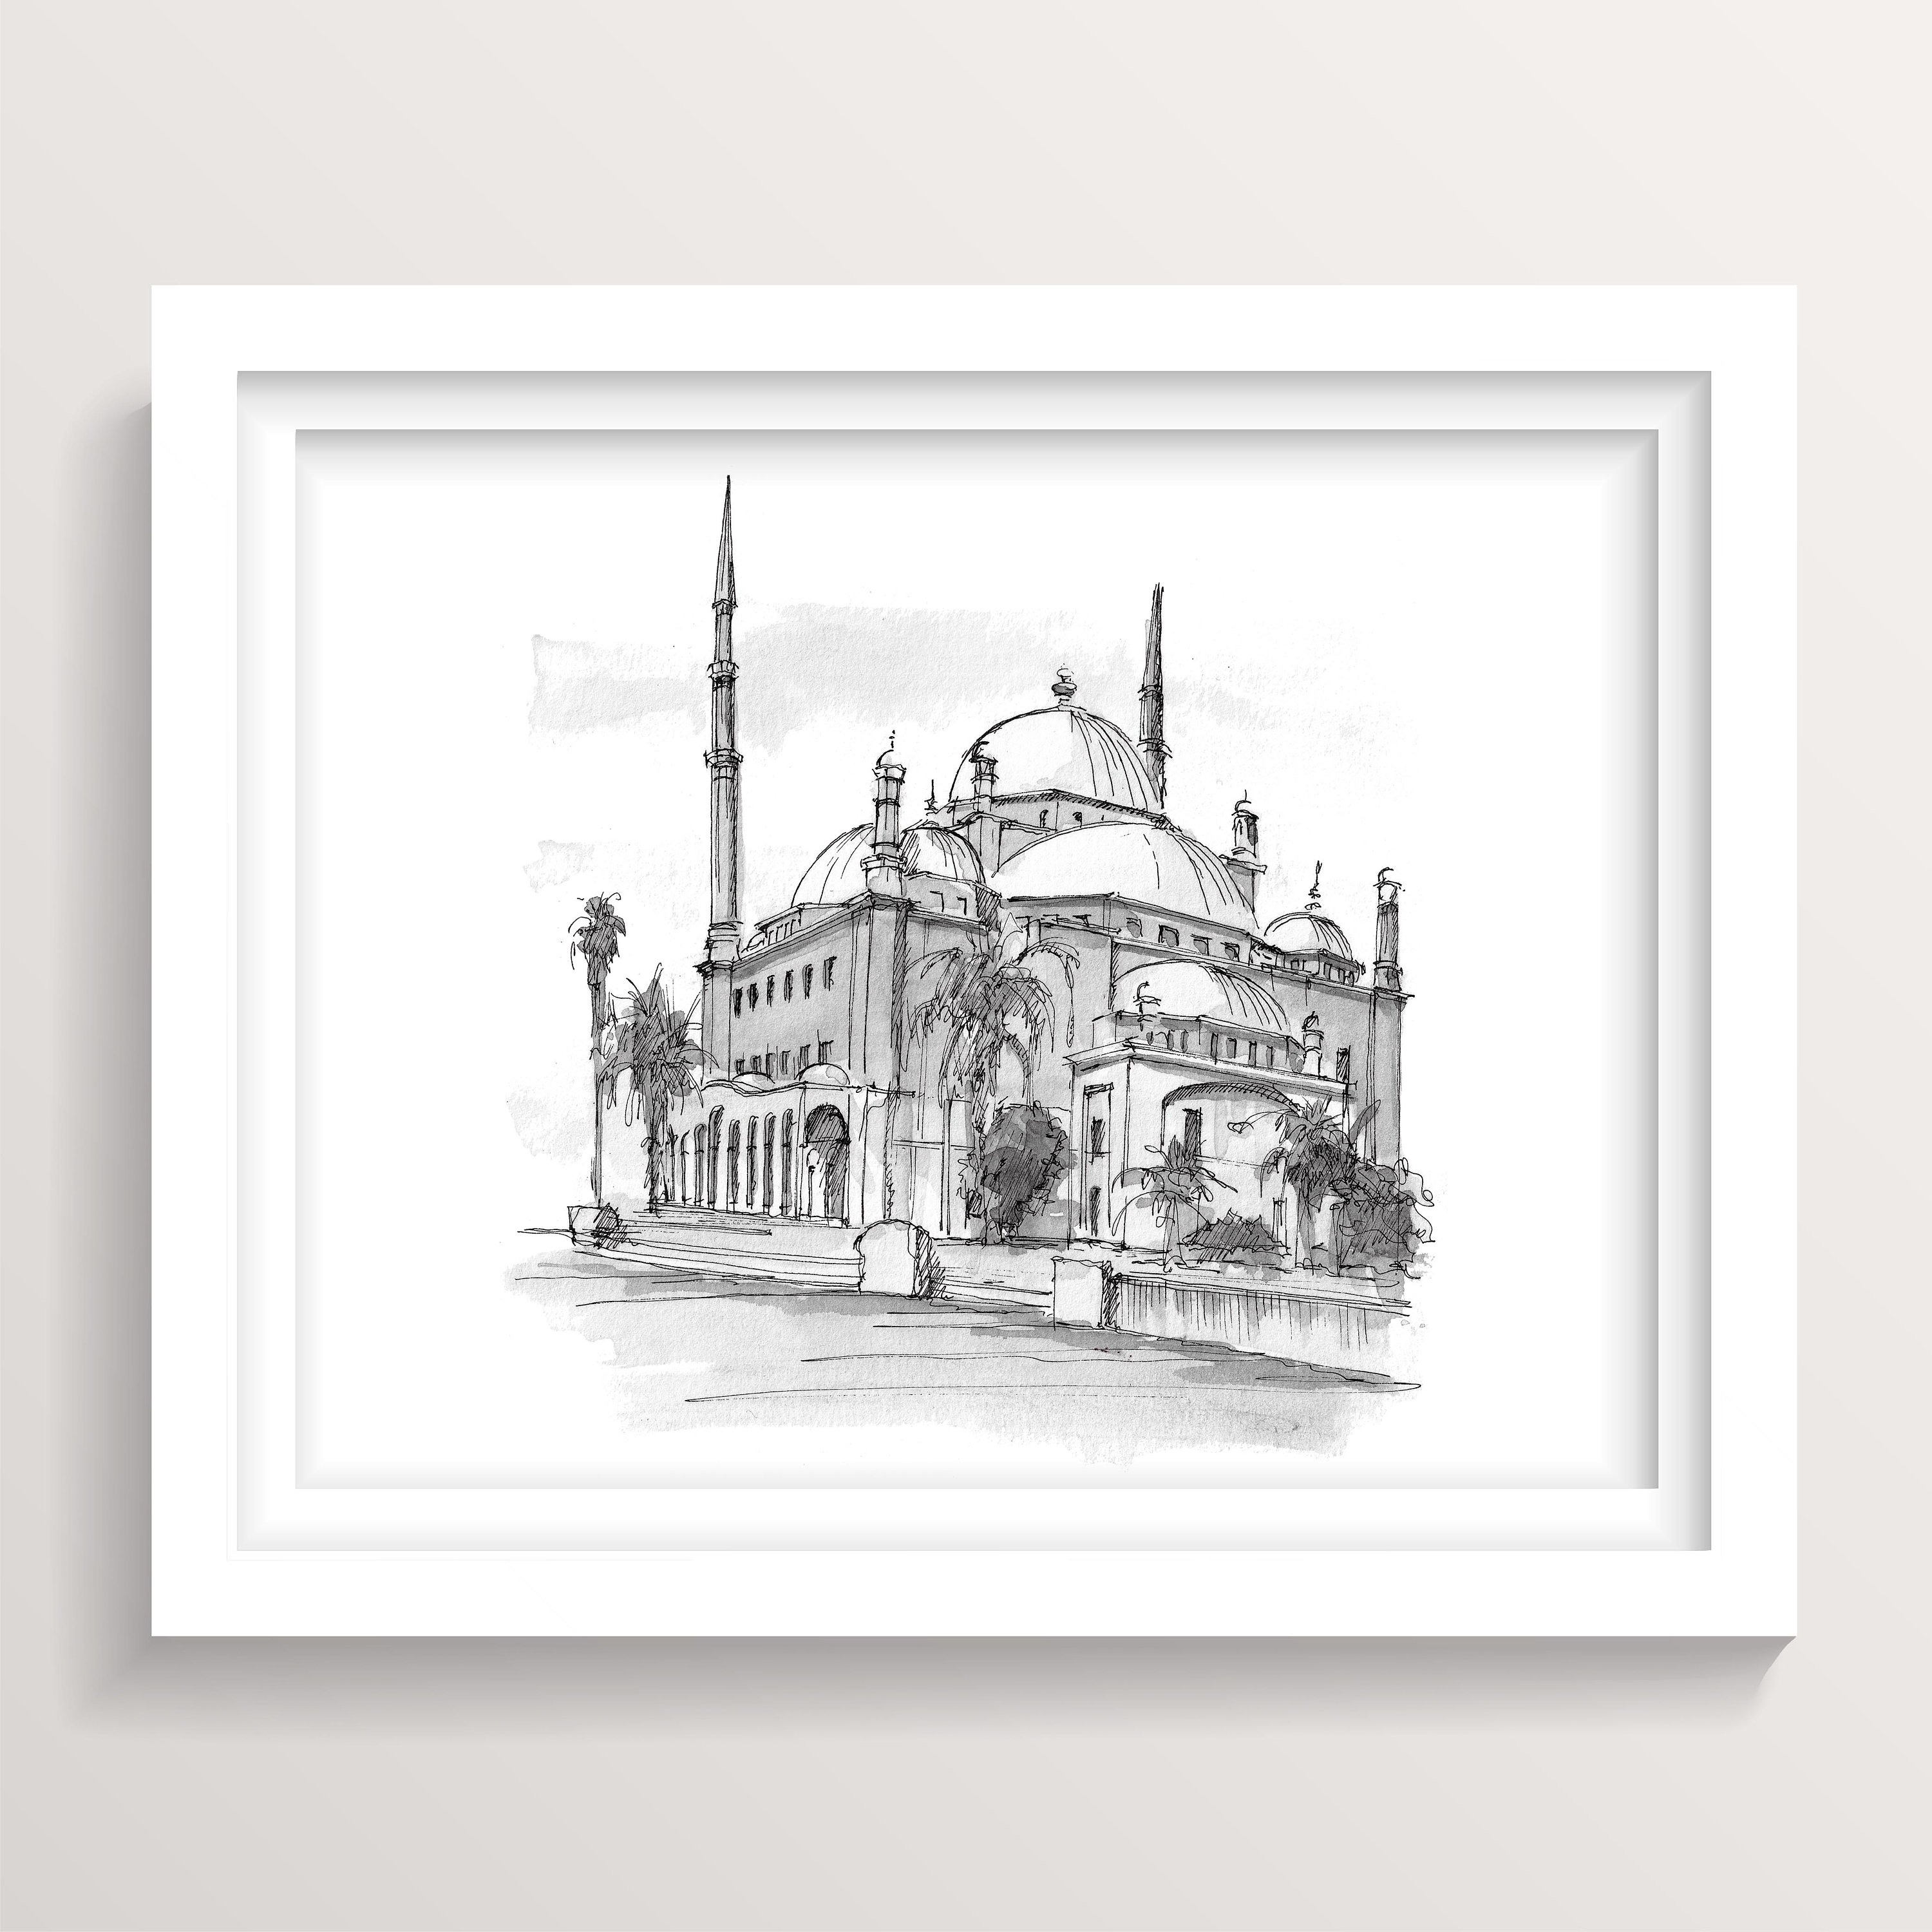 Shiny pencil sketch of sheep and mosque on white background for Islamic  Festival of Sacrifice, Eid-Al-Adha celebration. - Stock Image - Everypixel